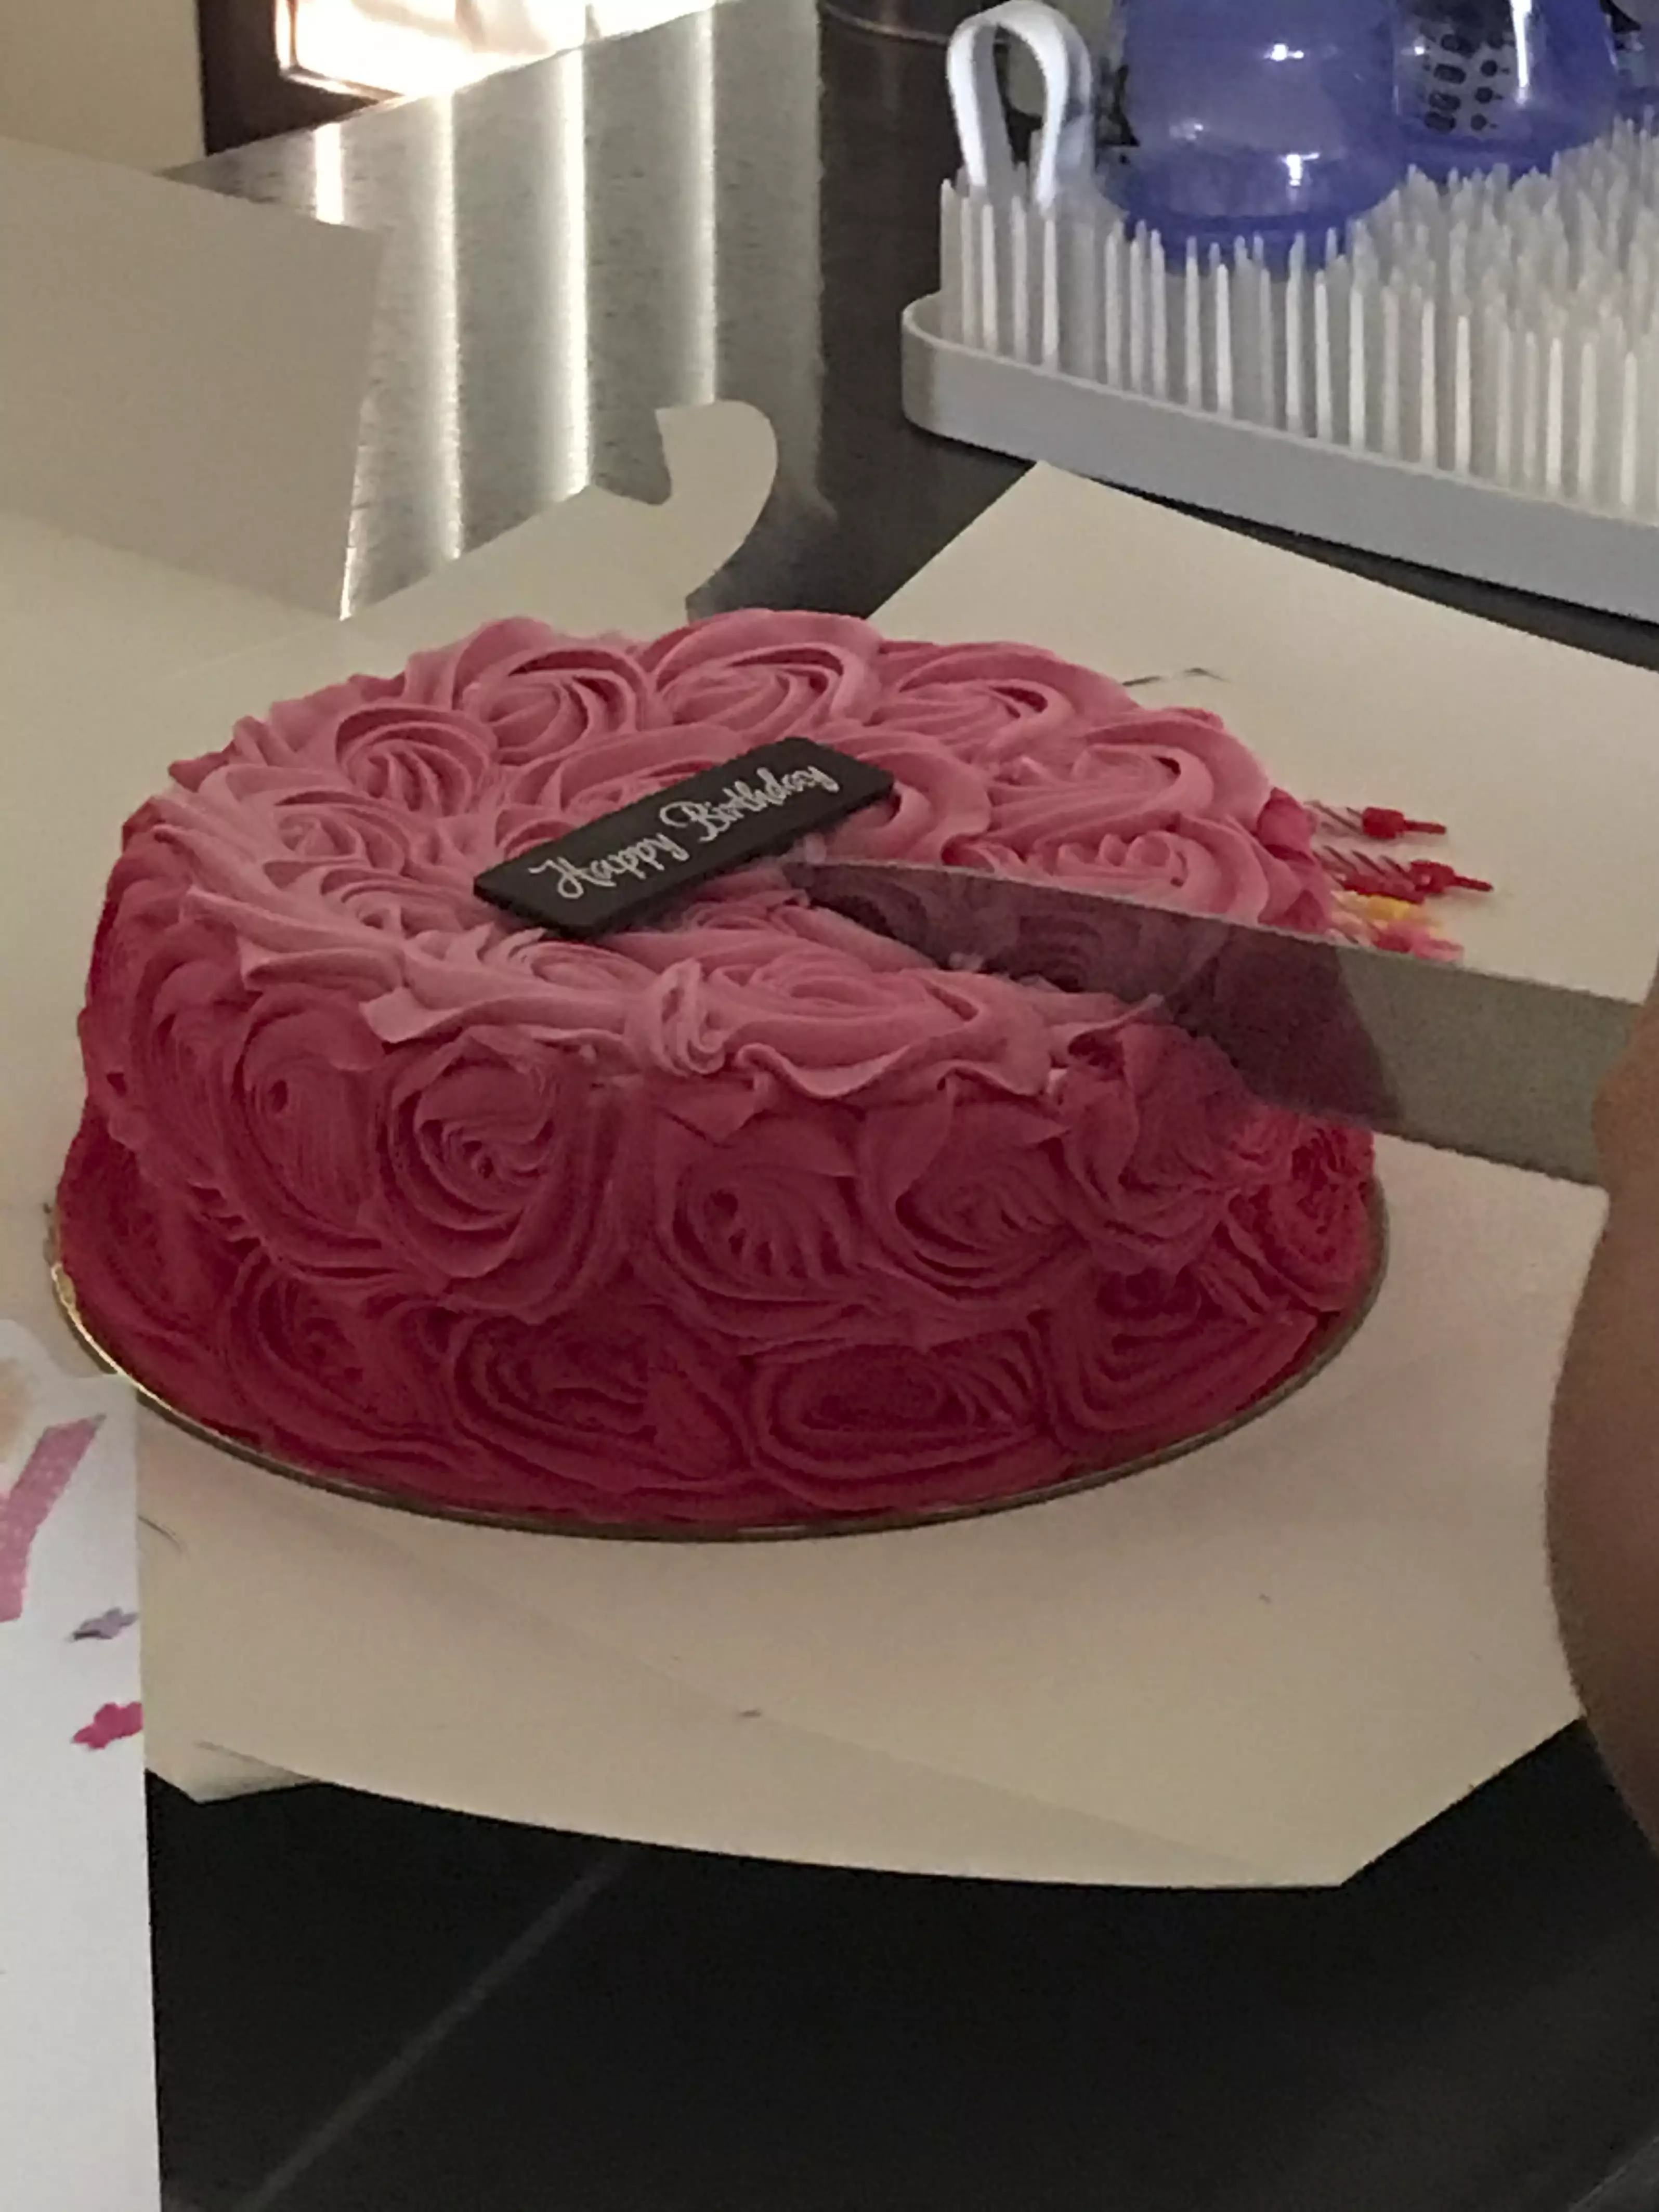 Cutting into the cake.